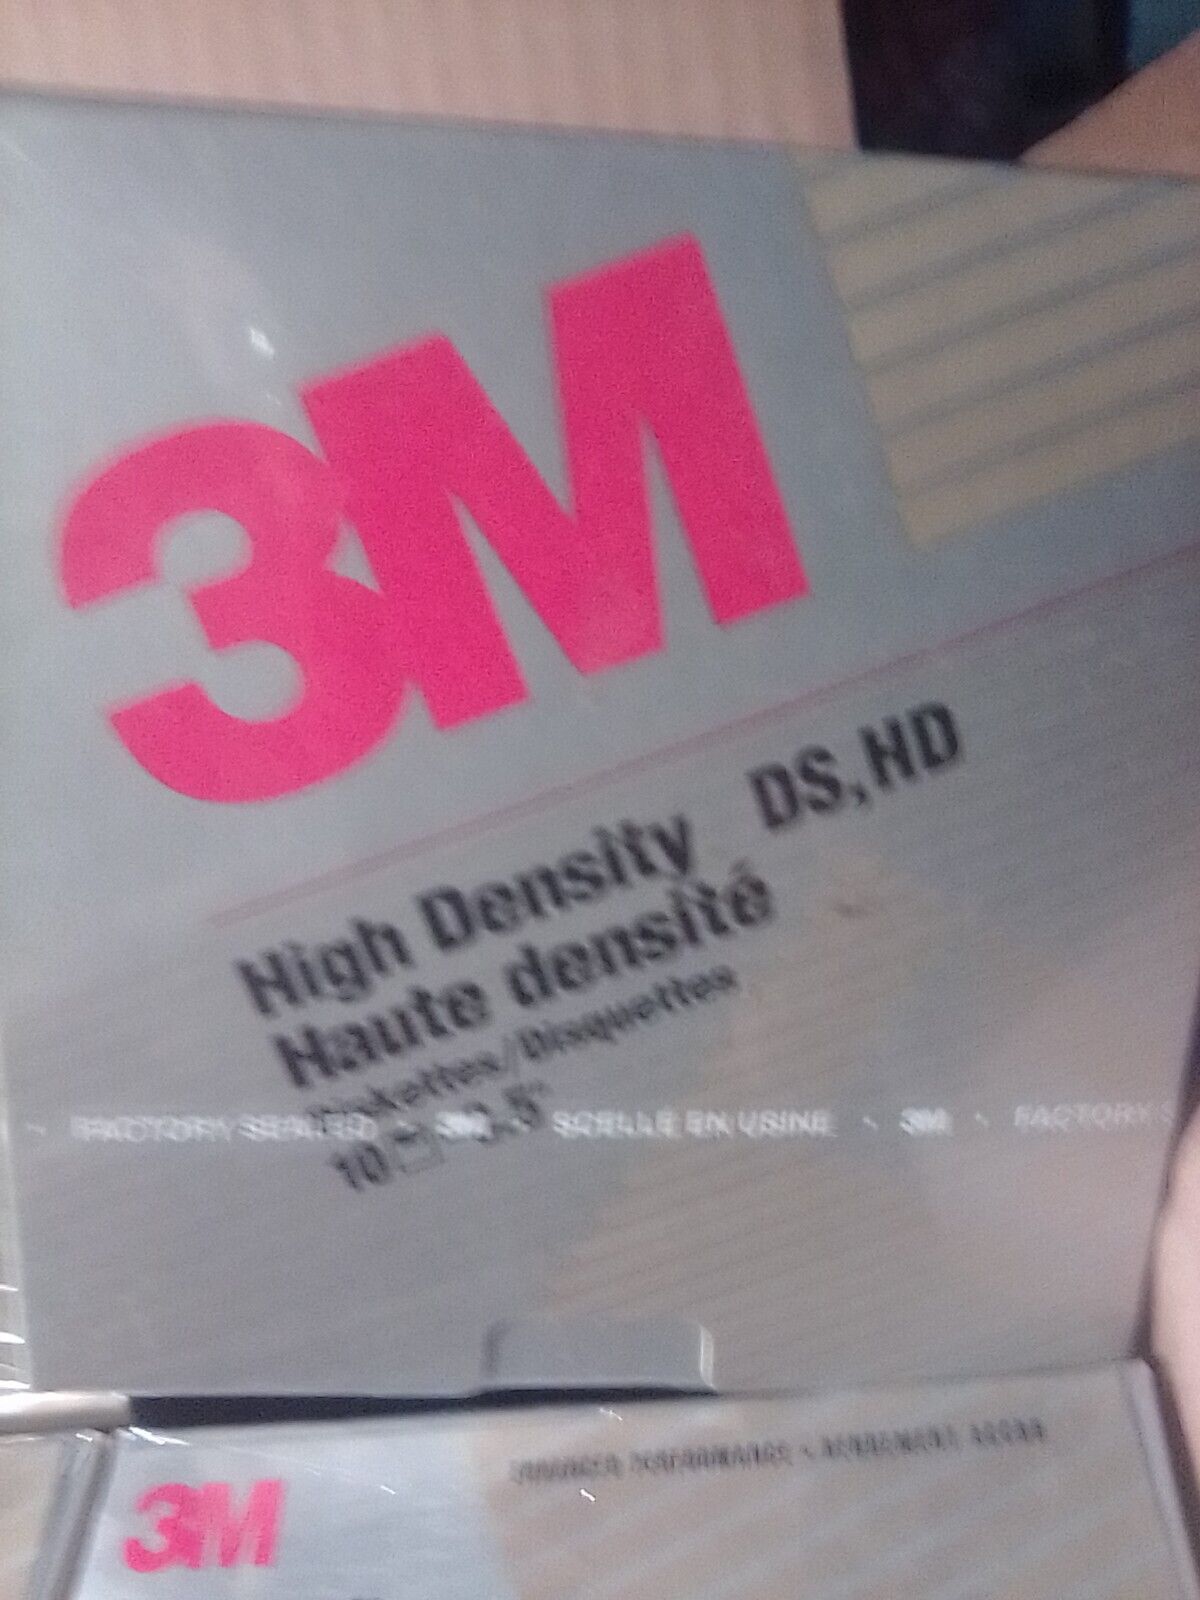 10 X 10 (100 diskettes) 3M High Density DS HD 3.5\